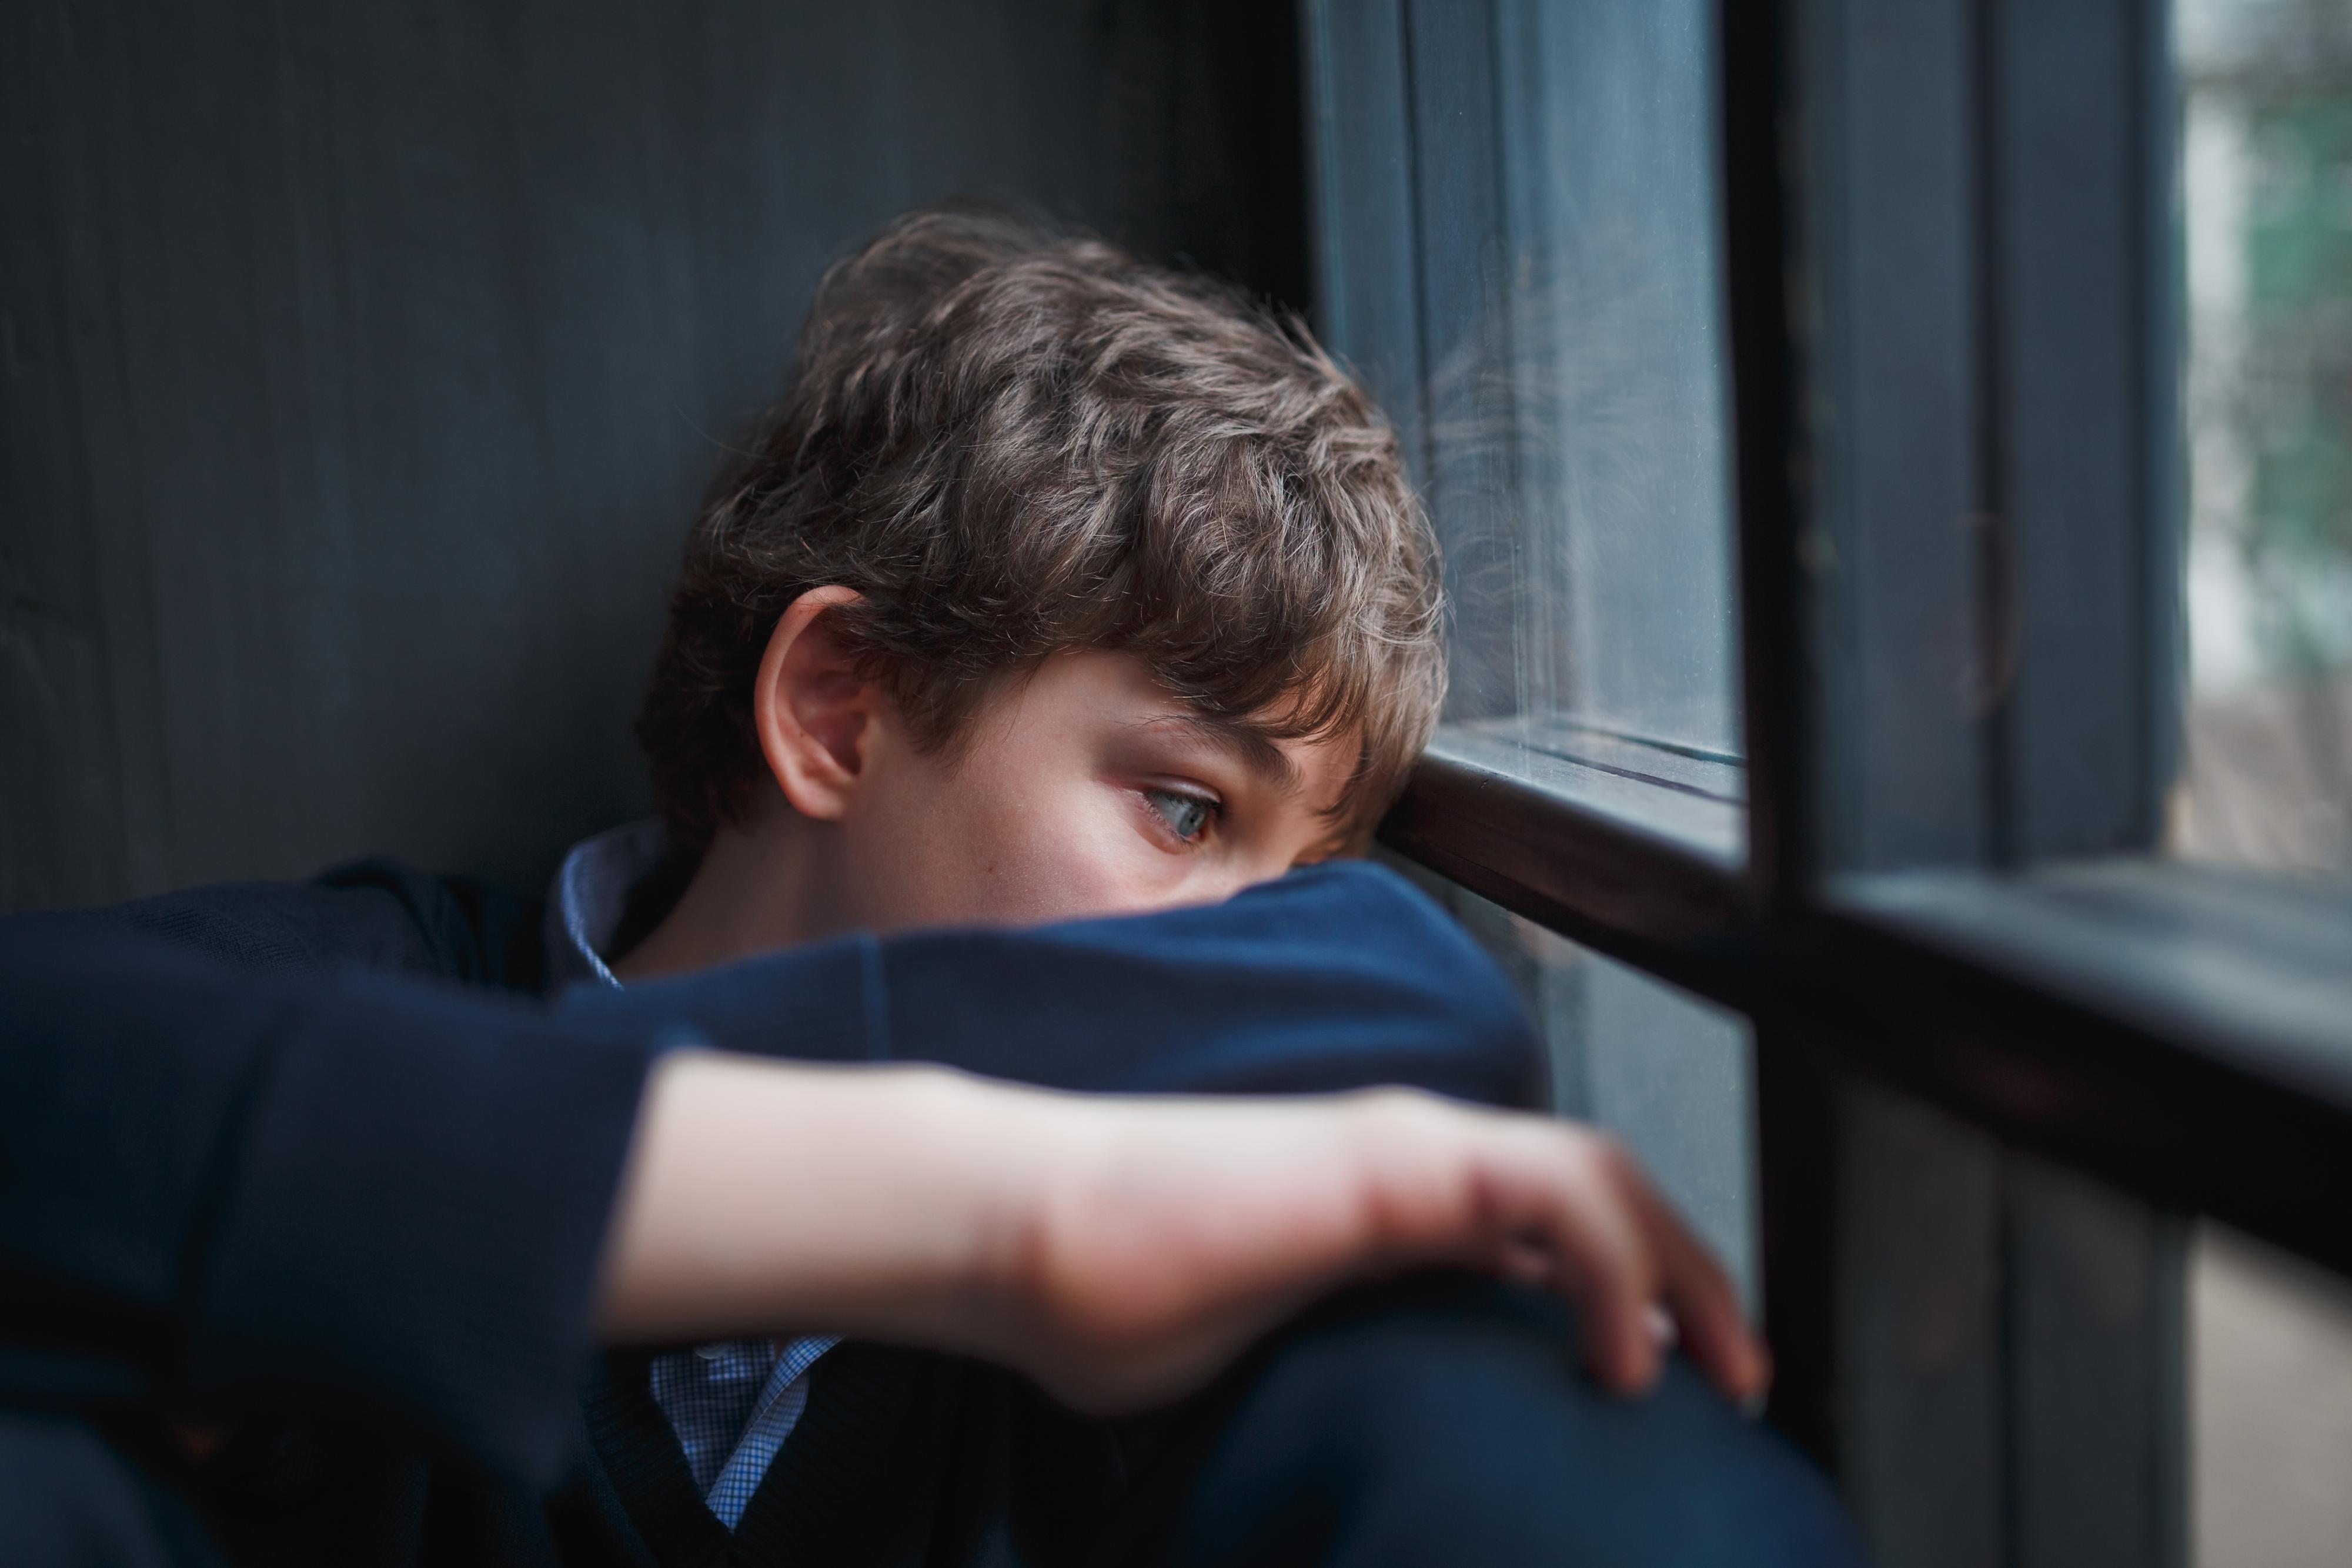 Teen boy looks depressed and is gazing out the window. He is wearing a dark blue sweatshirt and has brown hair and blue eyes.